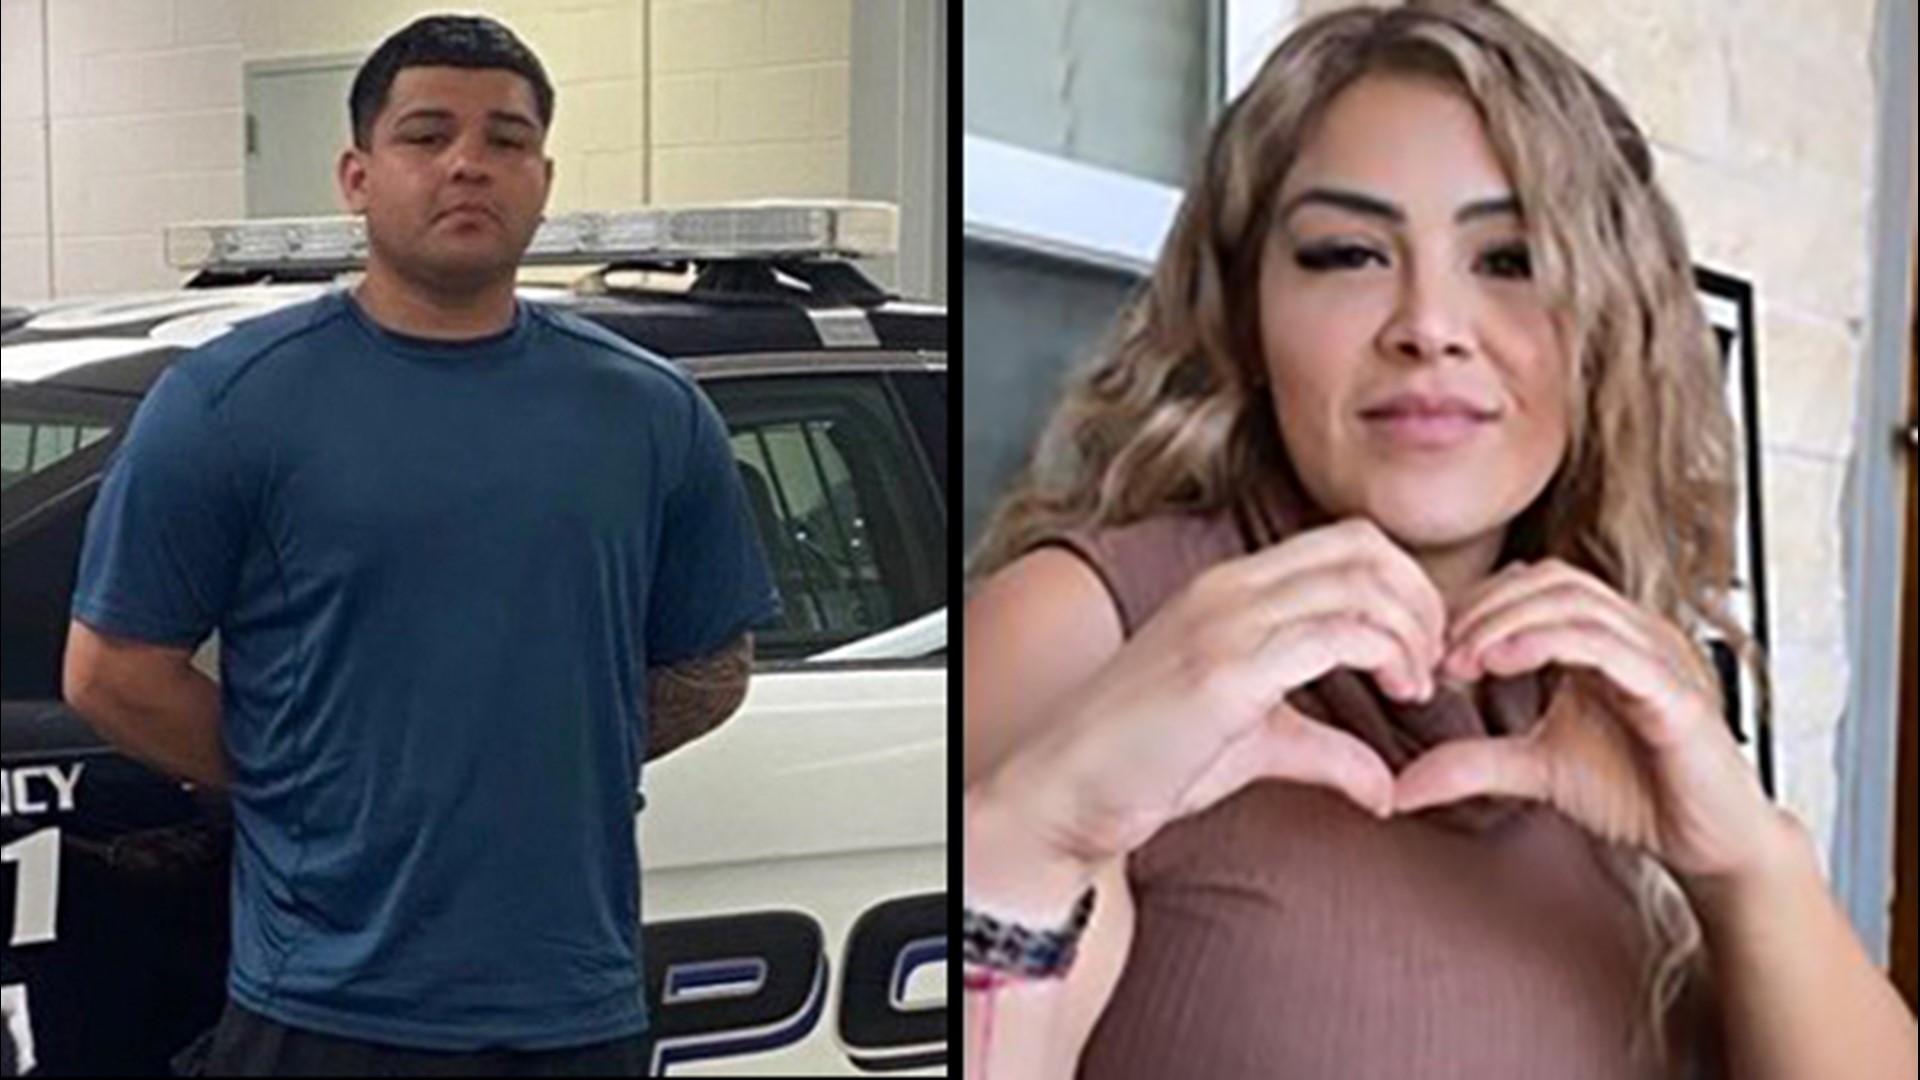 The 30-year-old ex-boyfriend of Maira Gutierrez was arrested in Mexico earlier this week. On Friday, he was officially charged with capital murder in her death.